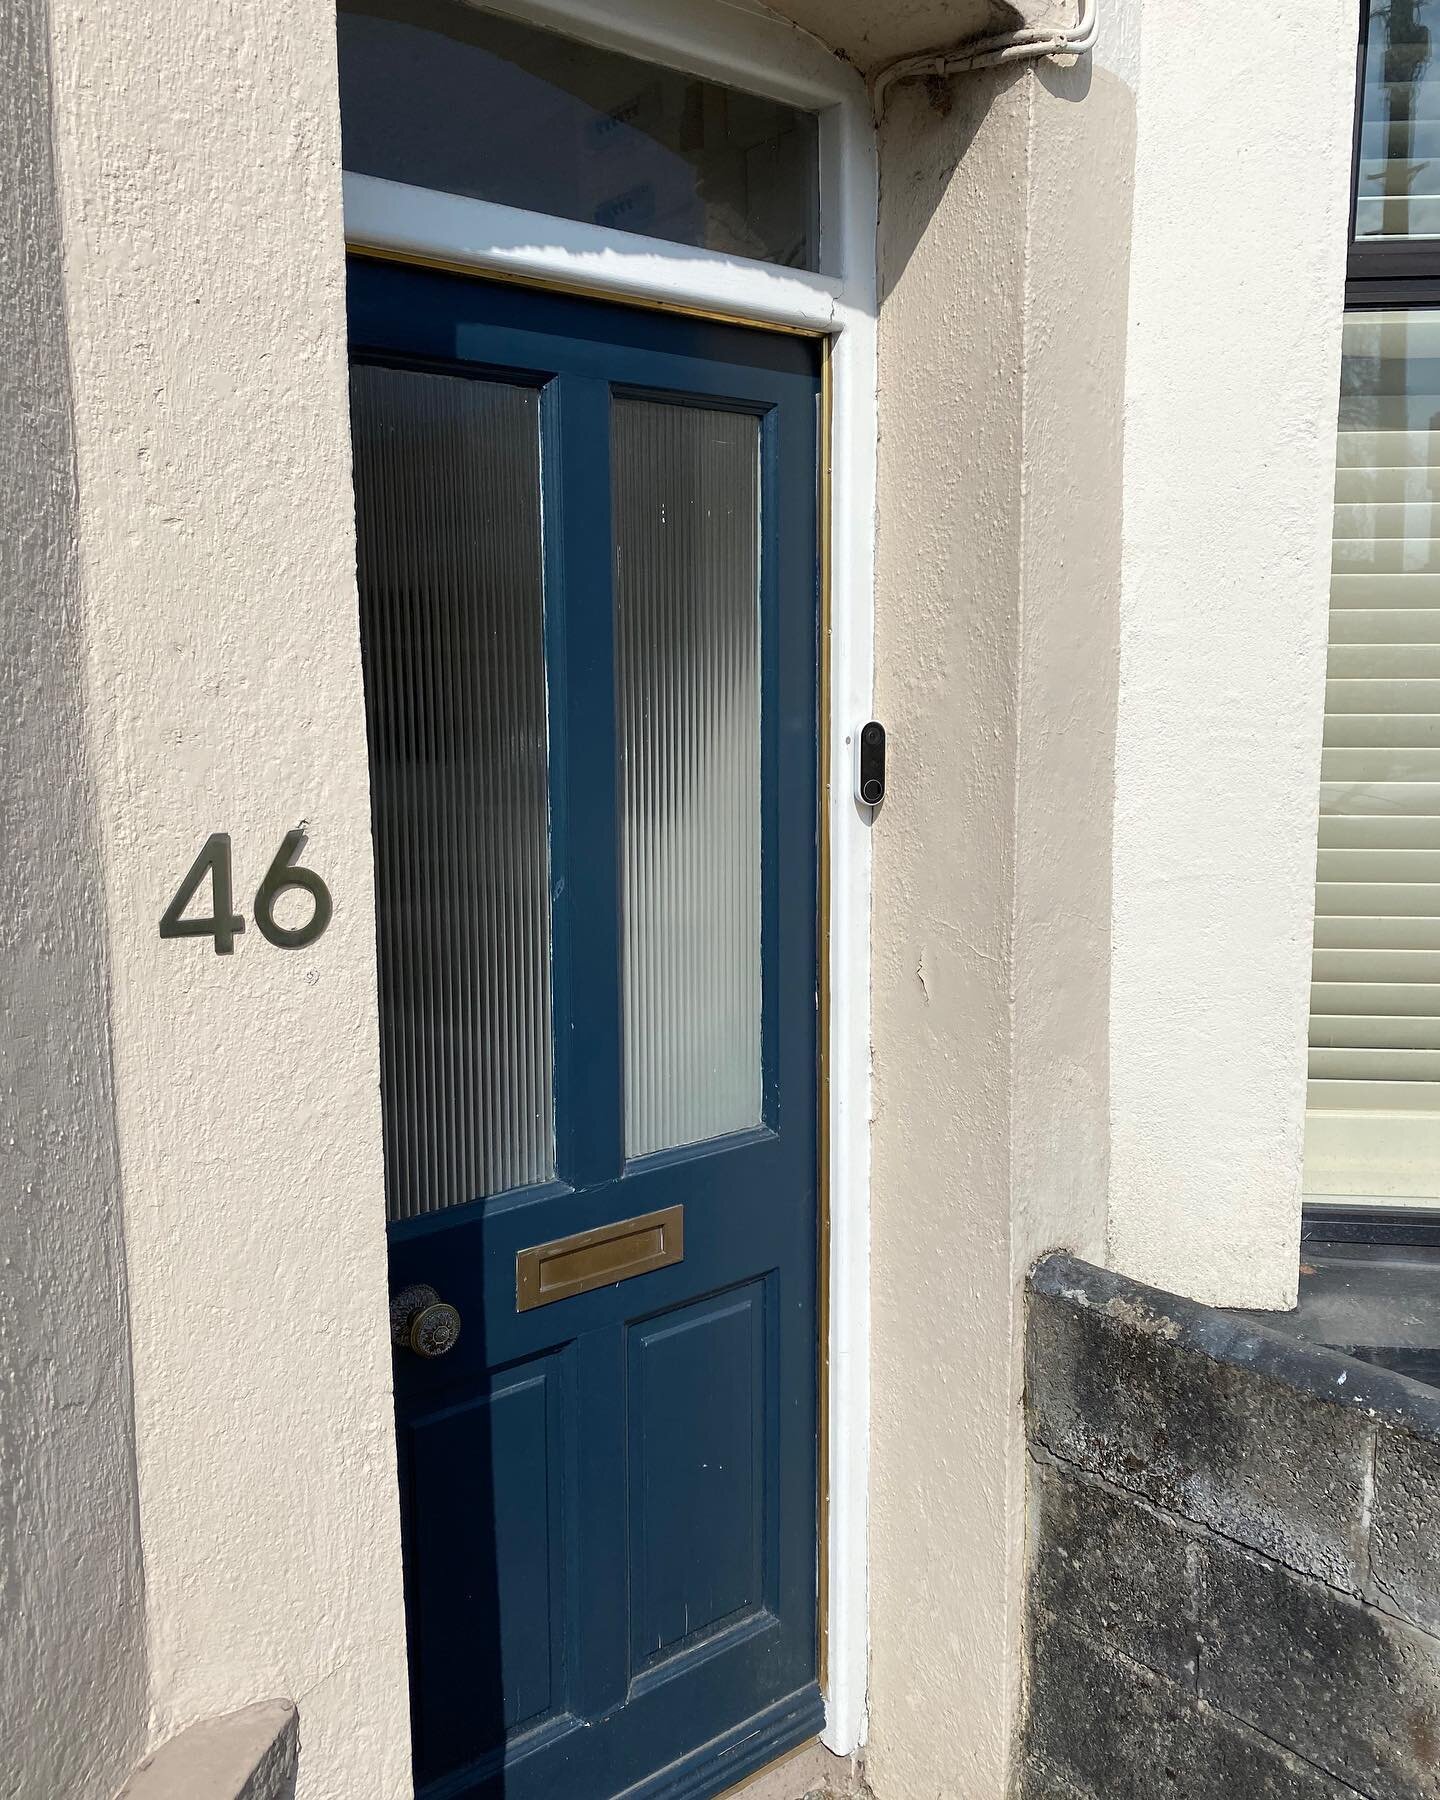 It&rsquo;s great to be back installing the latest in Google Nest technology. We installed this Nest Hello Video Doorbell and Nest Protect smoke alarm. Giving the client the ability to monitor the front door all from their mobile device. 

To find out